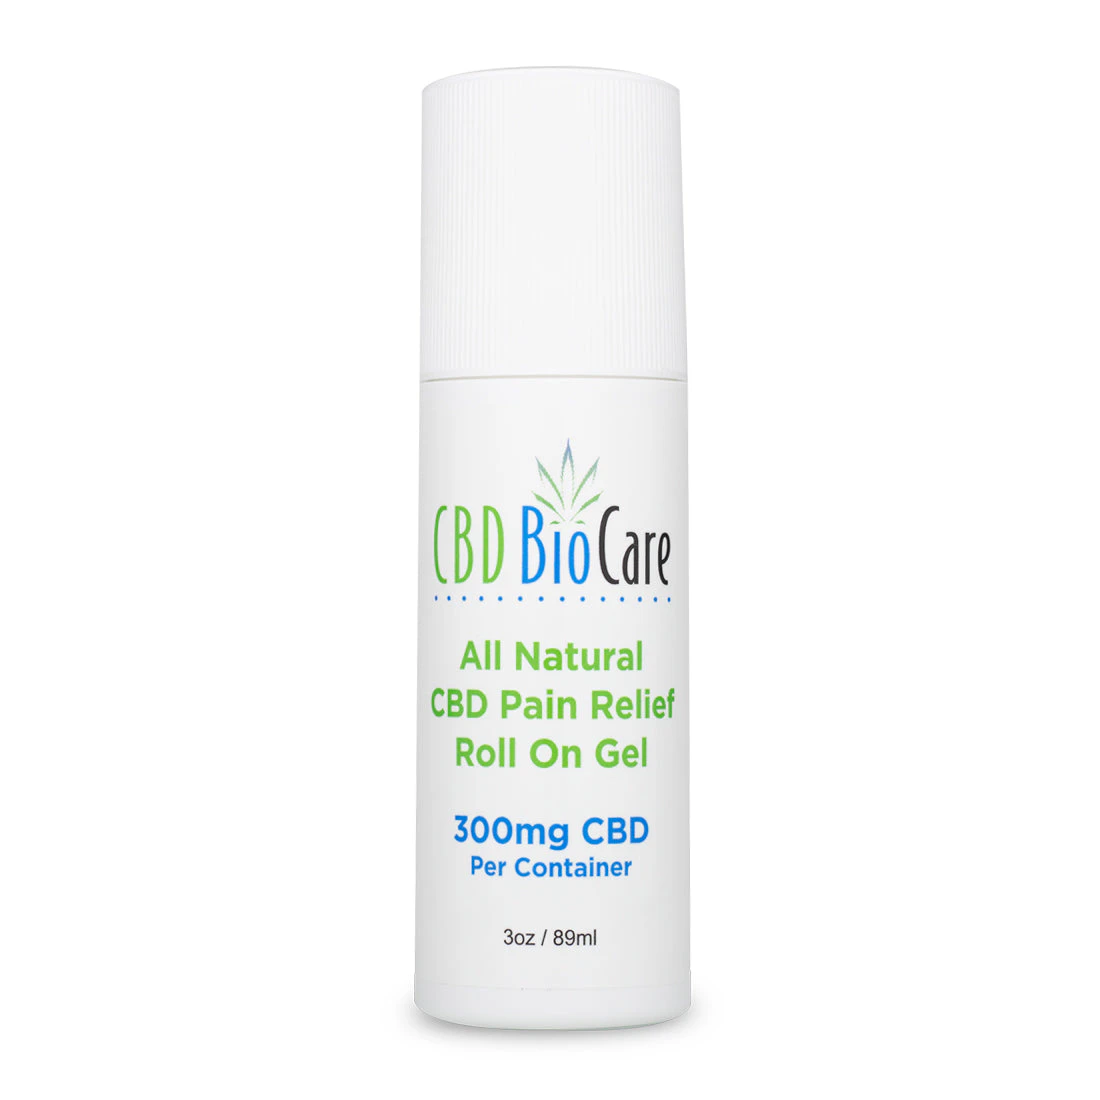 All Natural CBD Pain Relief Roll On Gel